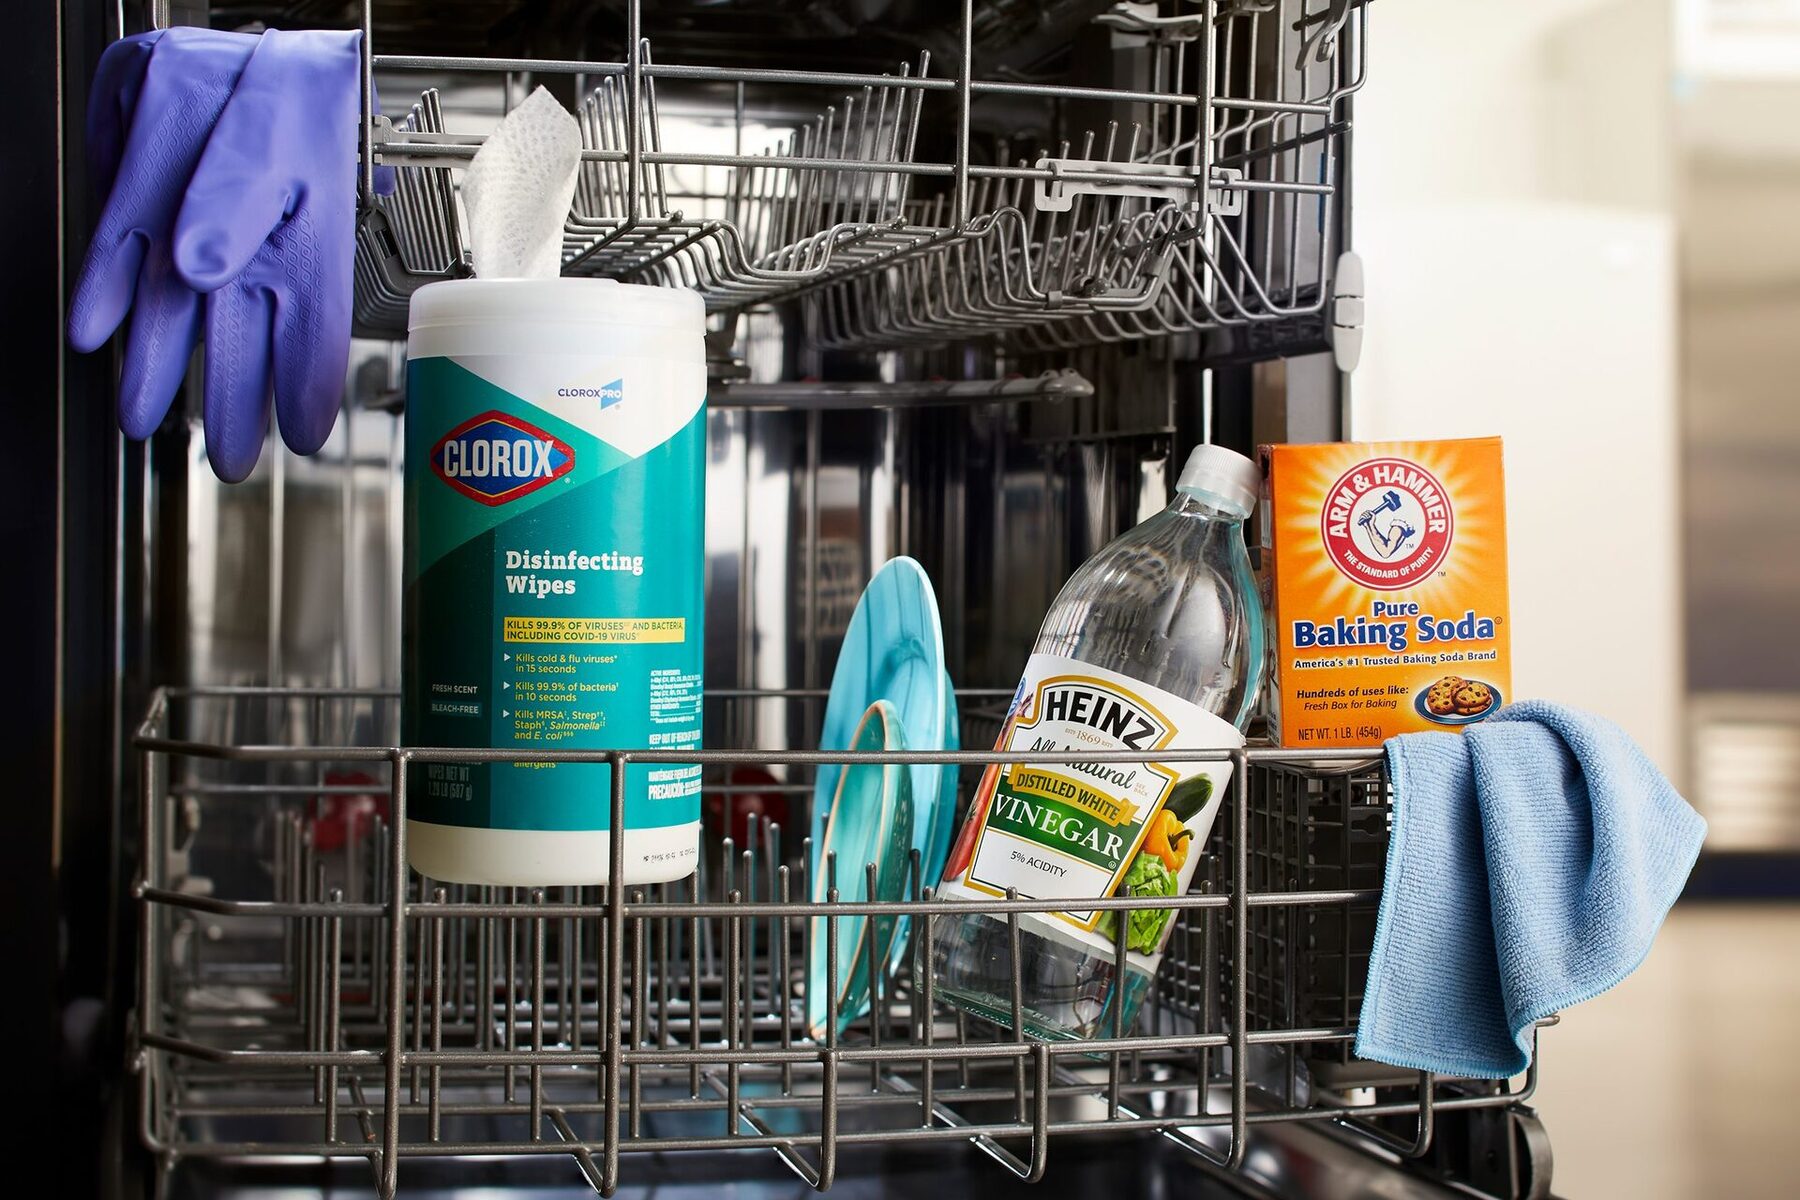 How To Clean Your Dishwasher With Vinegar And Baking Soda